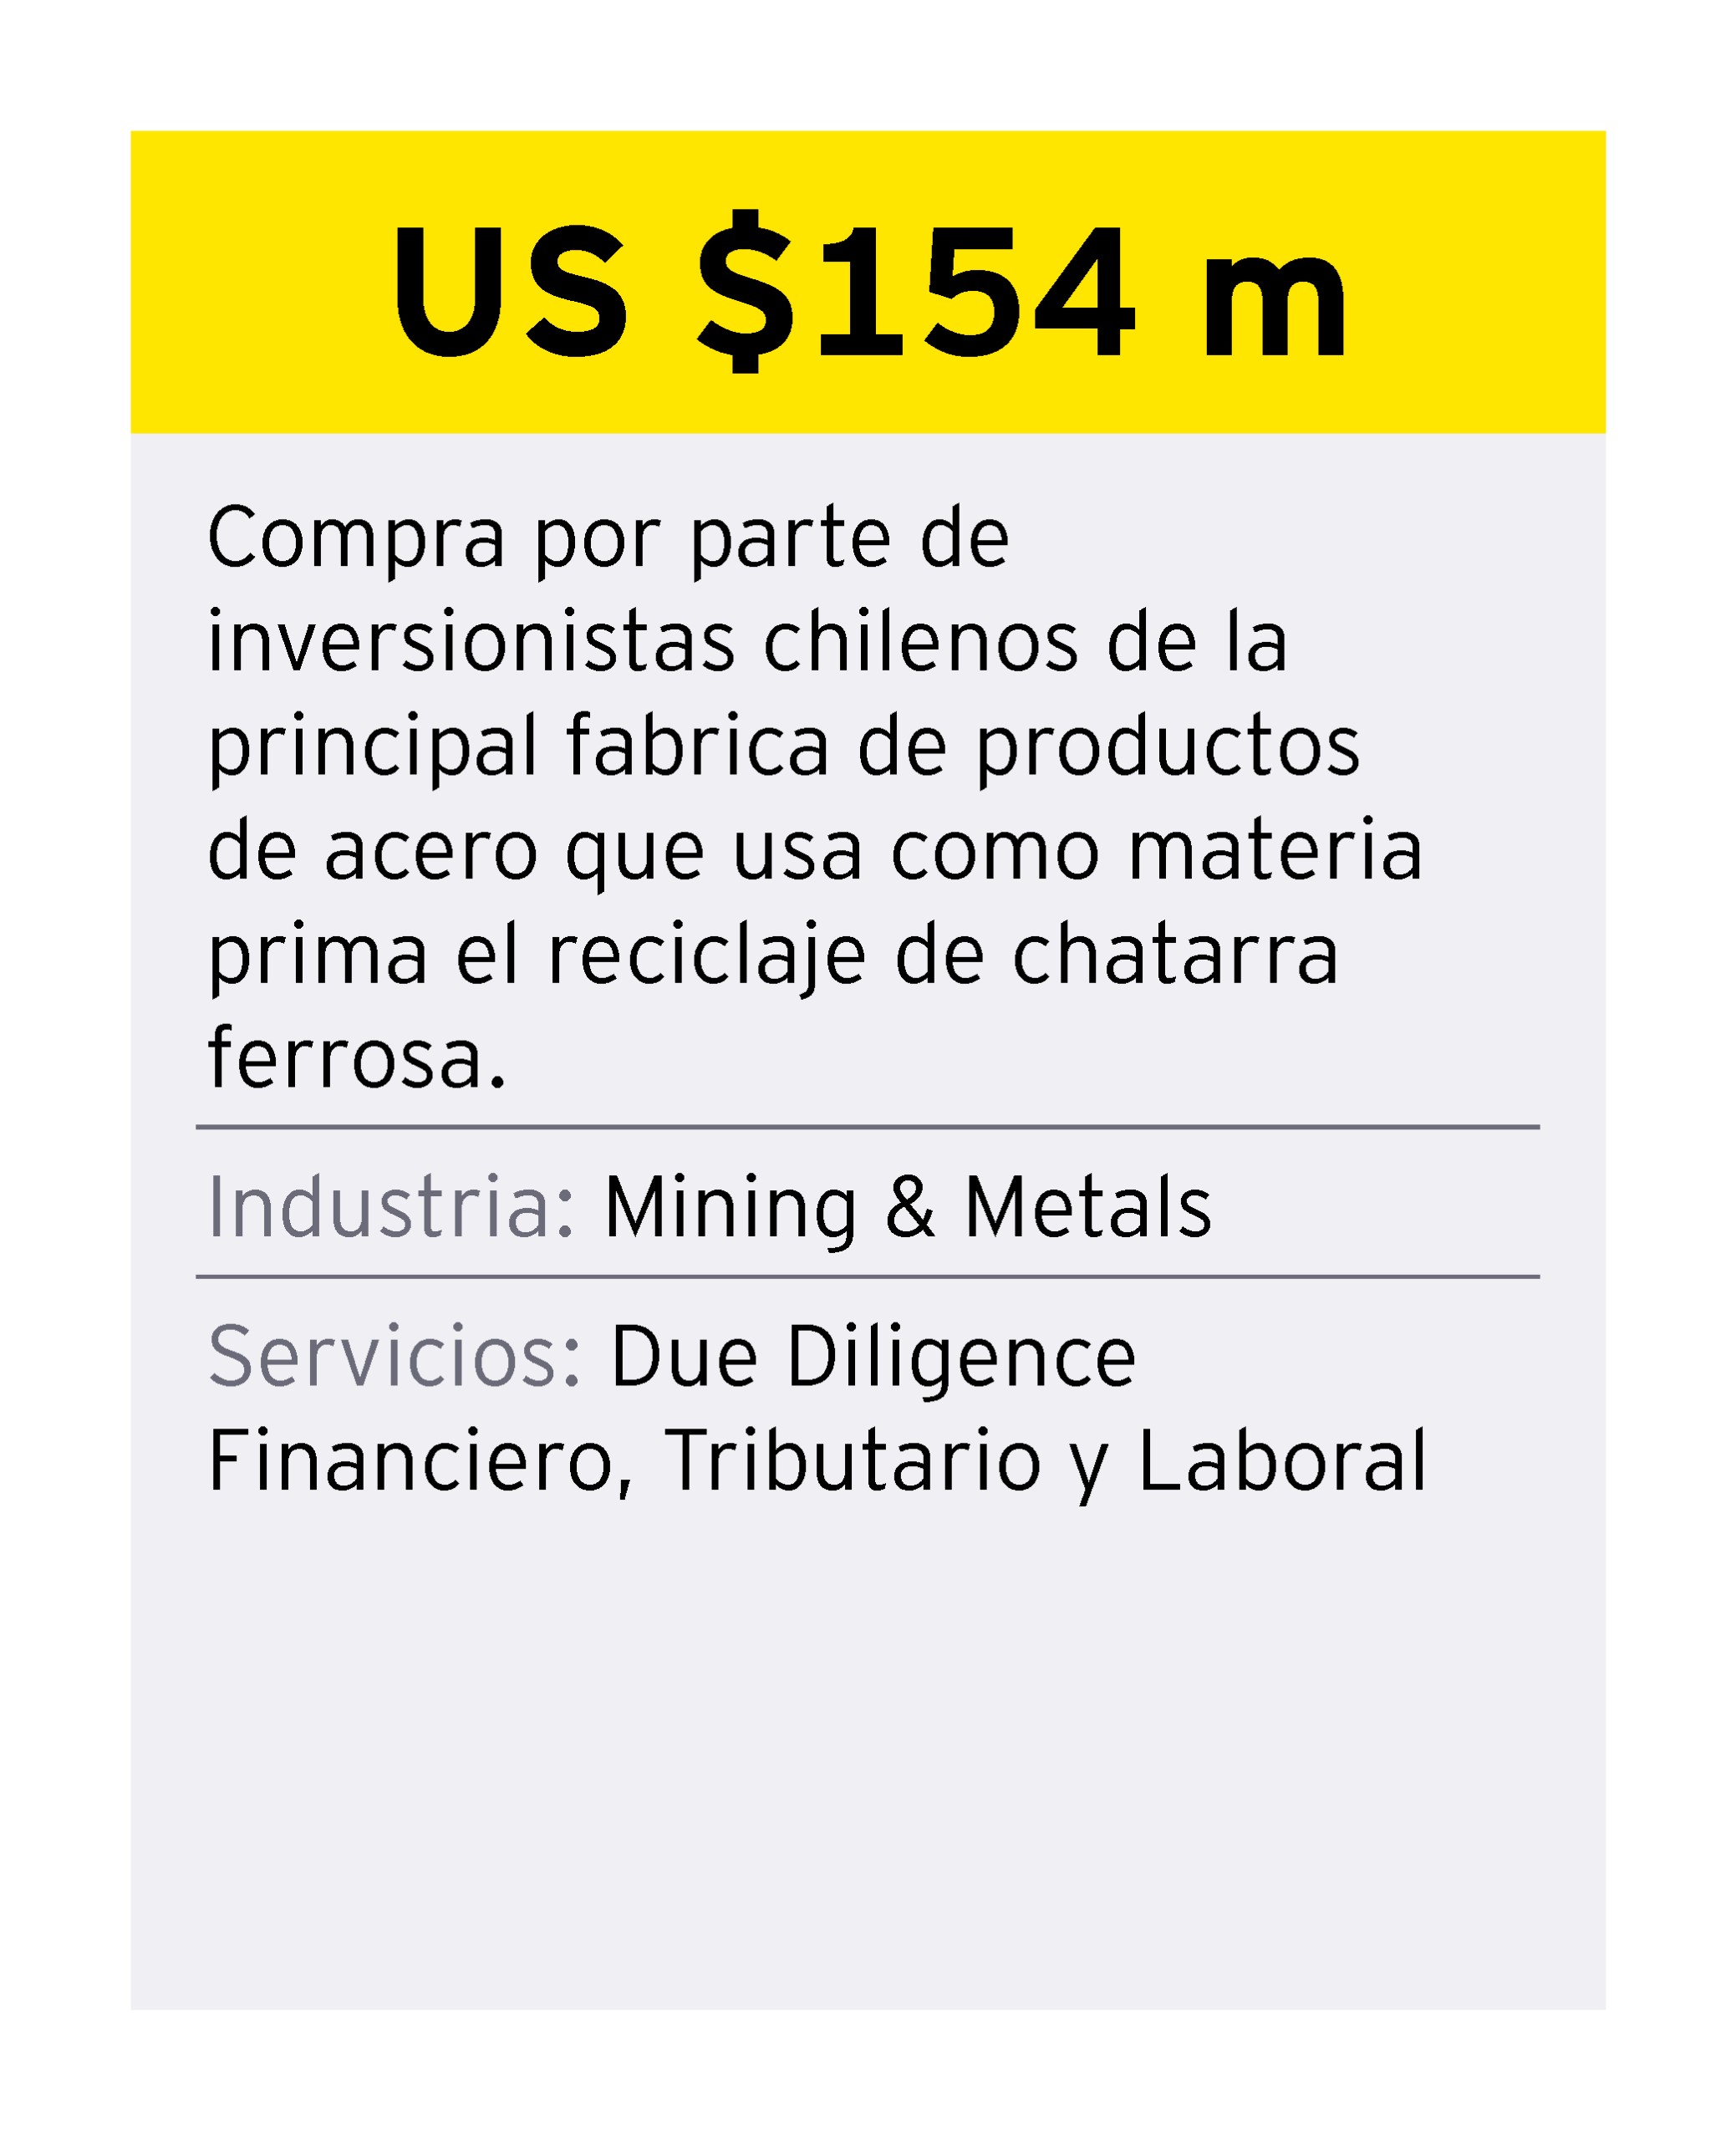 ey-chile-credencial-3-mining-and-metals